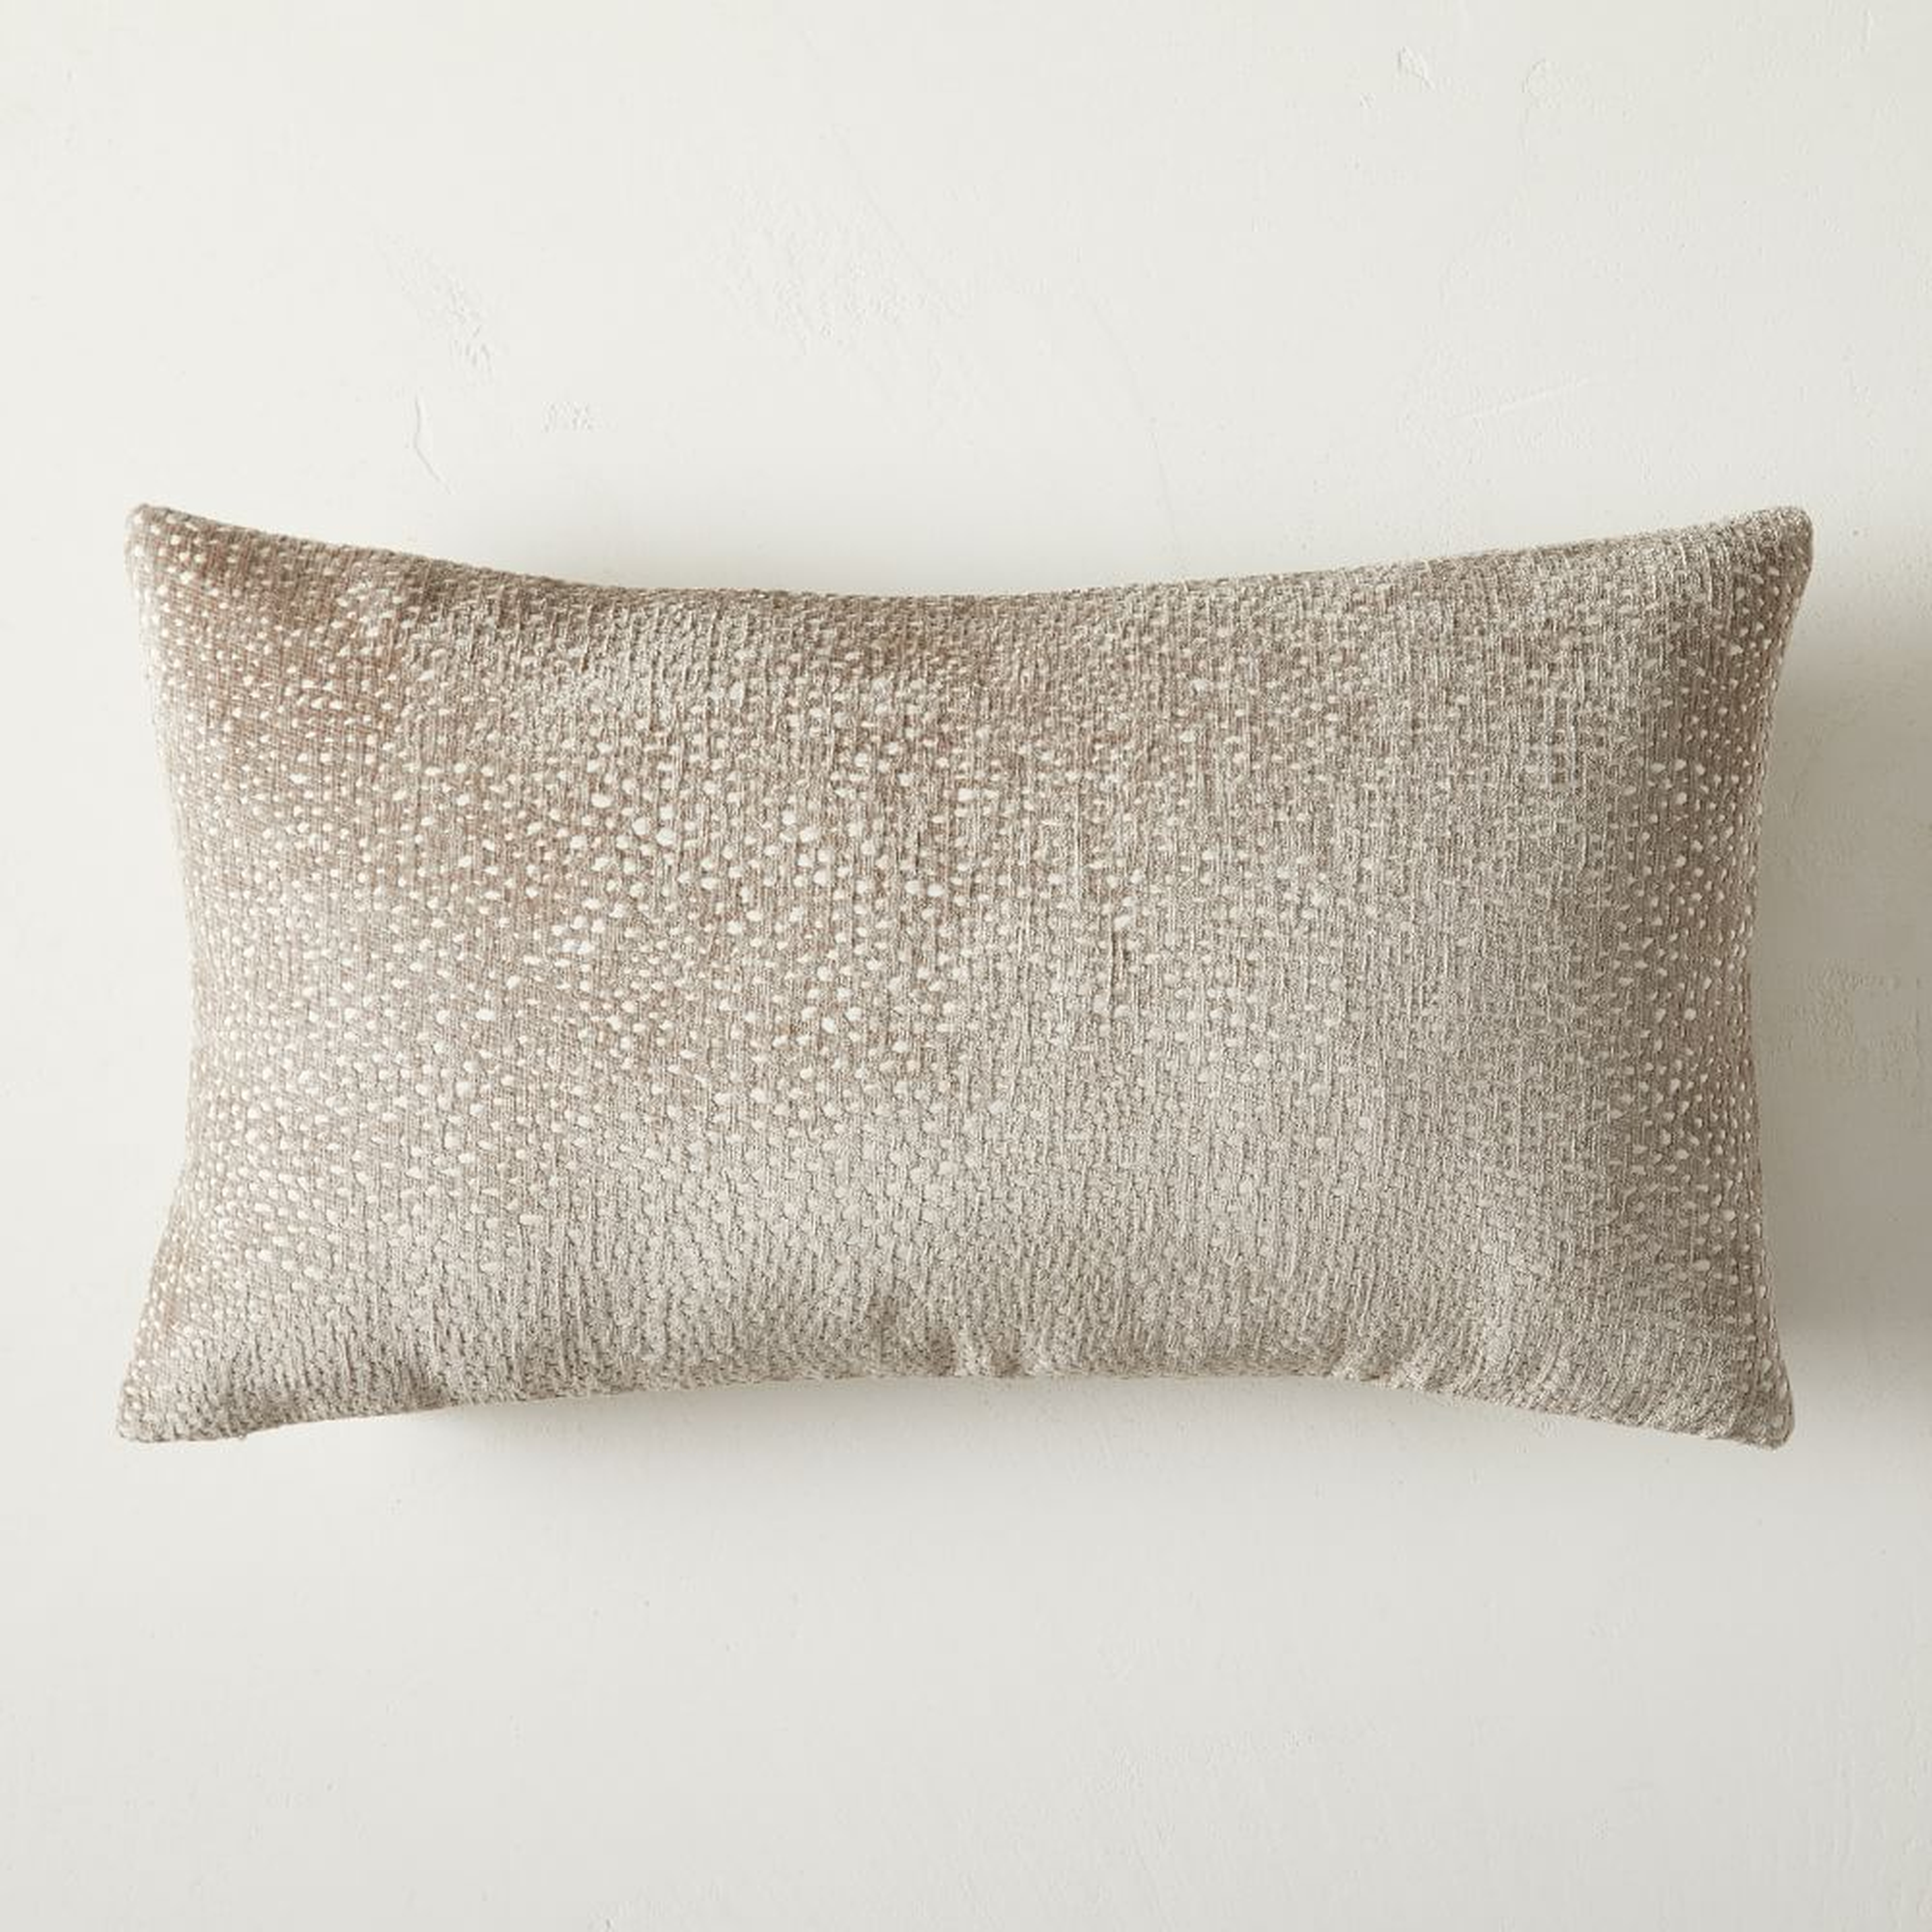 Dotted Chenille Jacquard Pillow Cover, Dark Tan, 12x21, Set of 2 - West Elm